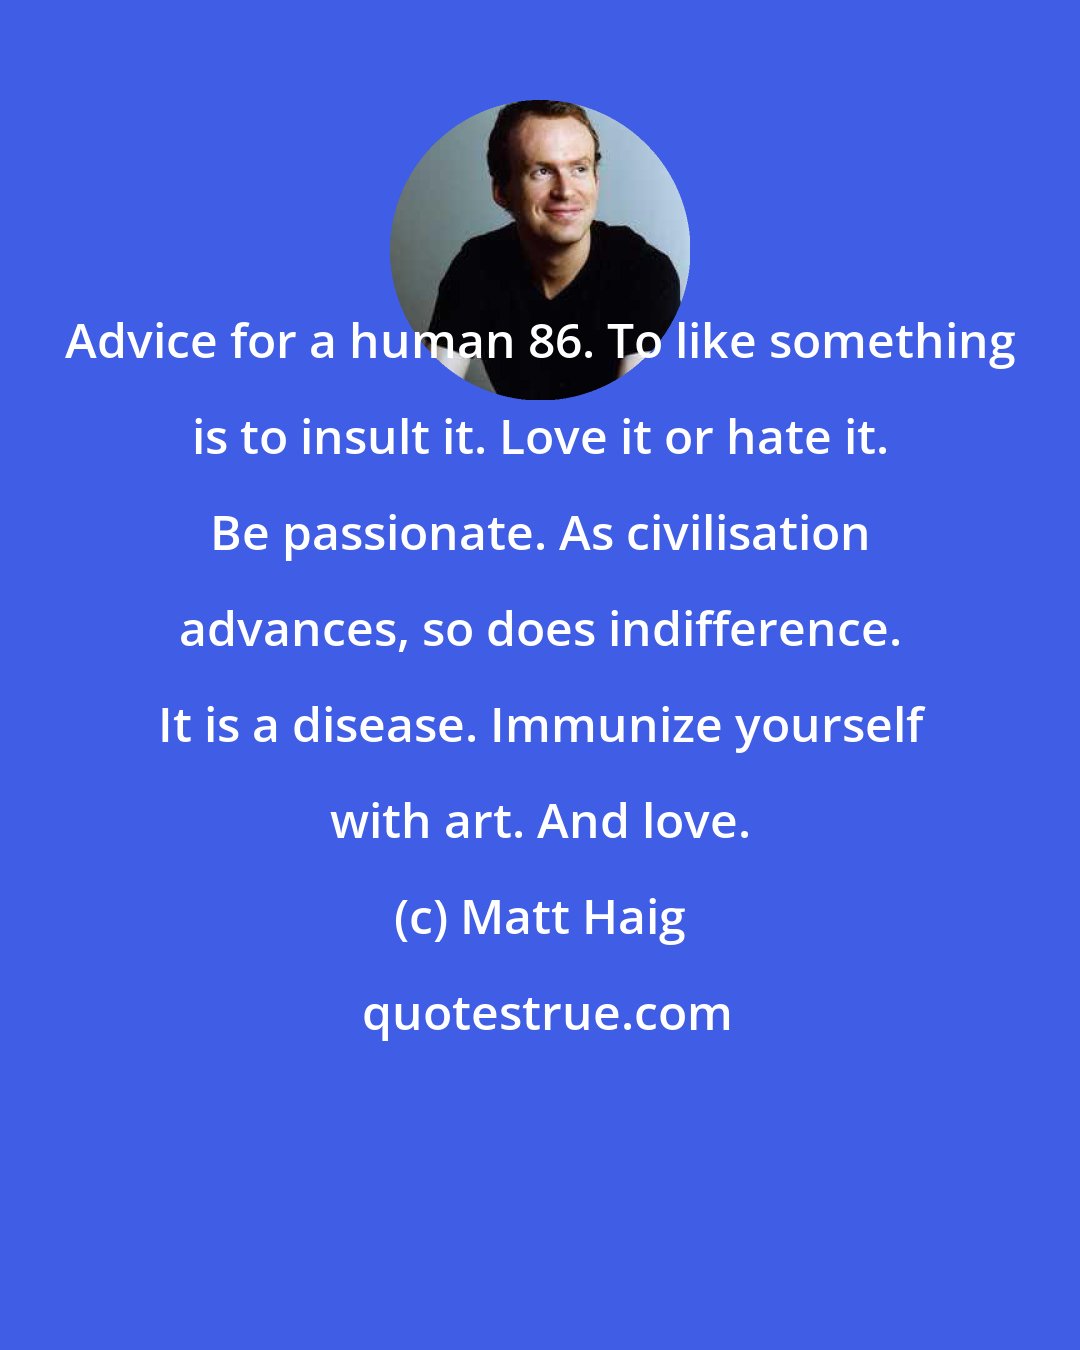 Matt Haig: Advice for a human 86. To like something is to insult it. Love it or hate it. Be passionate. As civilisation advances, so does indifference. It is a disease. Immunize yourself with art. And love.